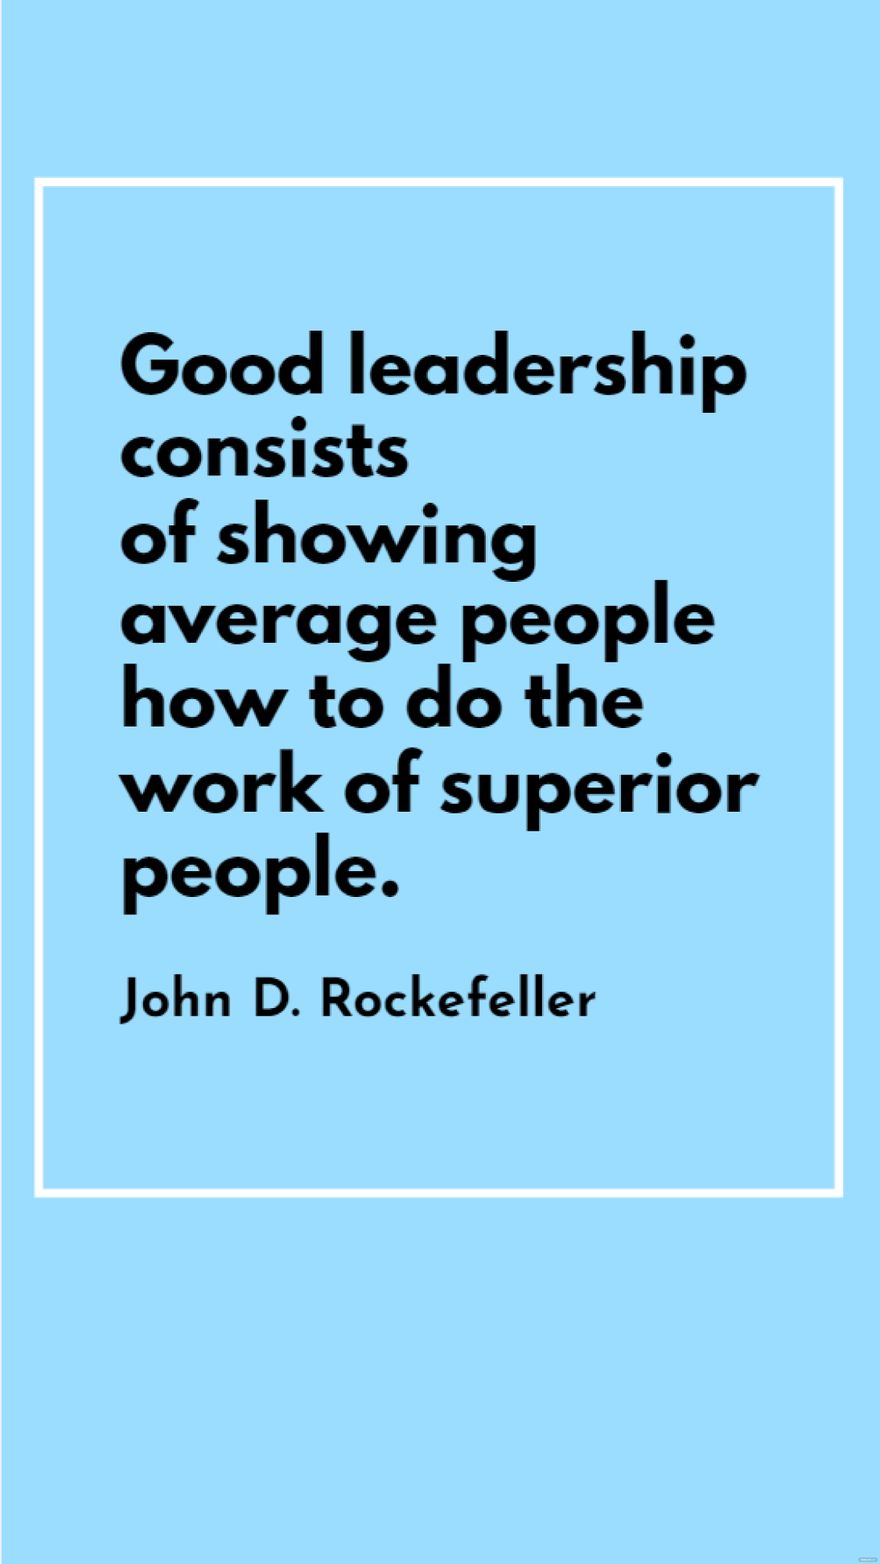 John D. Rockefeller - Good leadership consists of showing average people how to do the work of superior people. in JPG